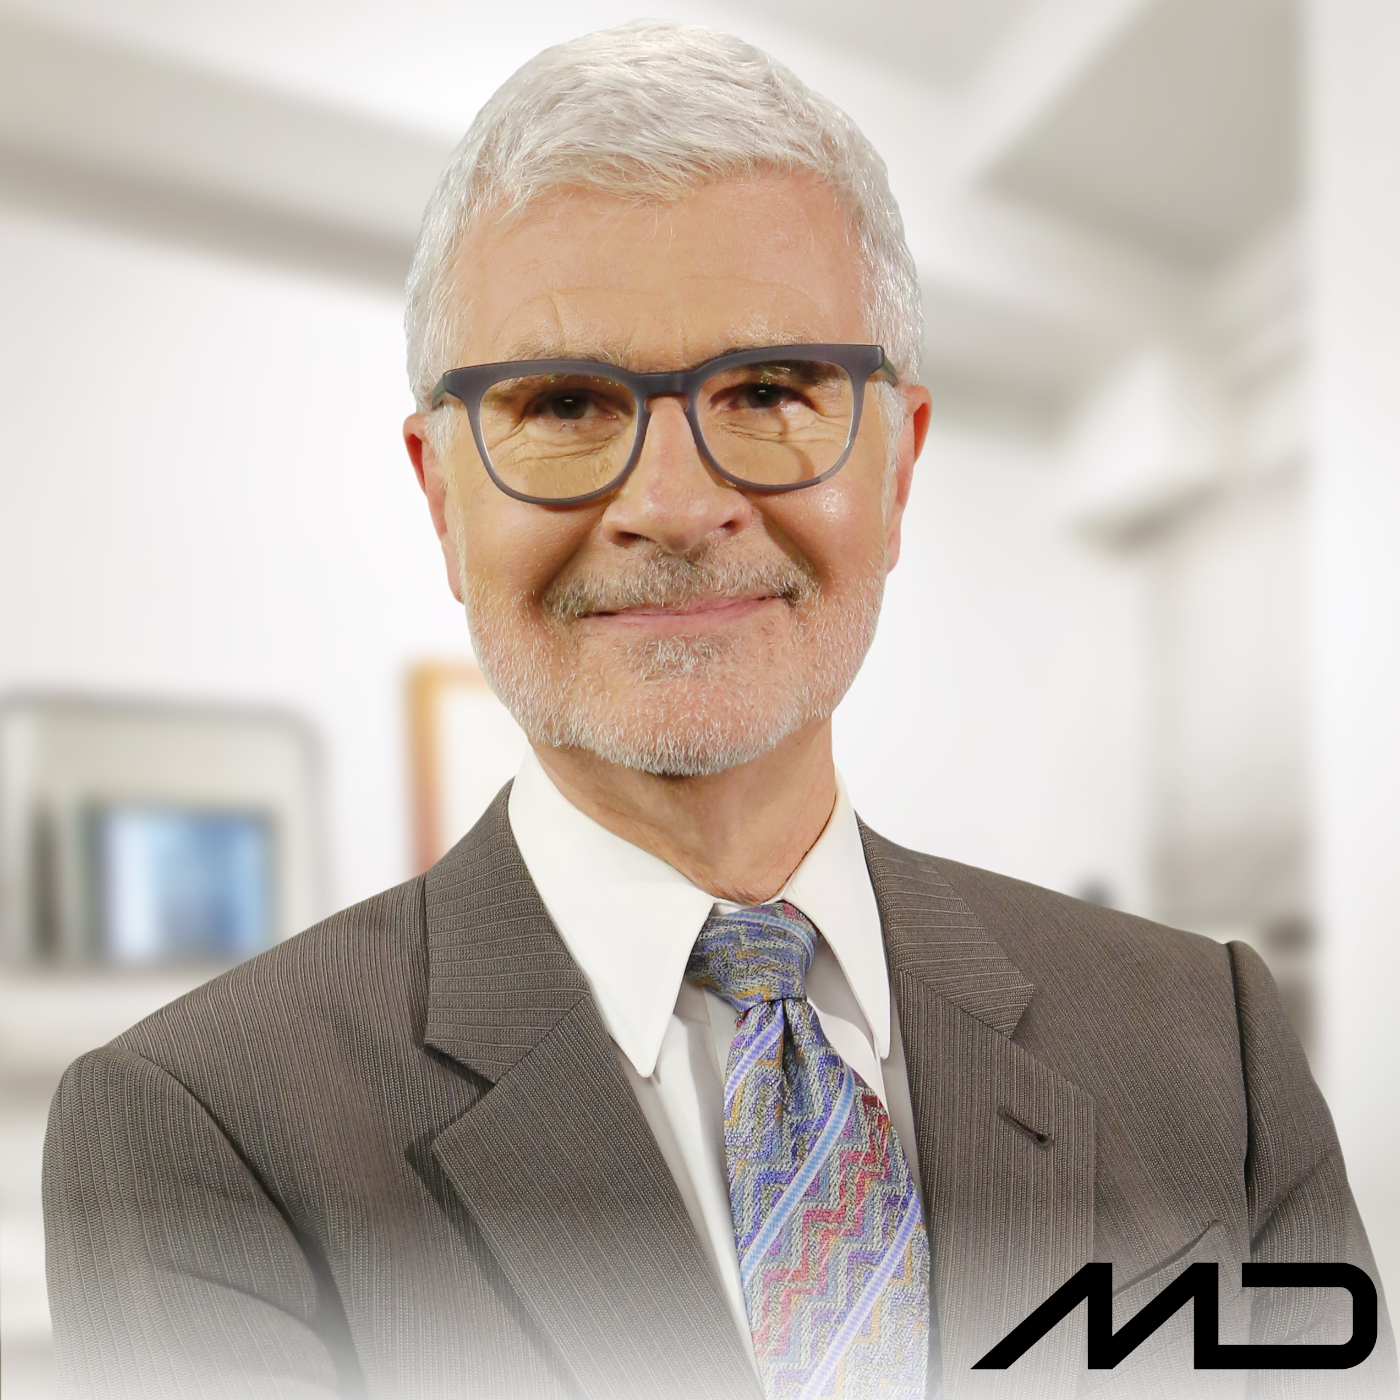 How To Live Forever, with Dr. Steven Gundry...